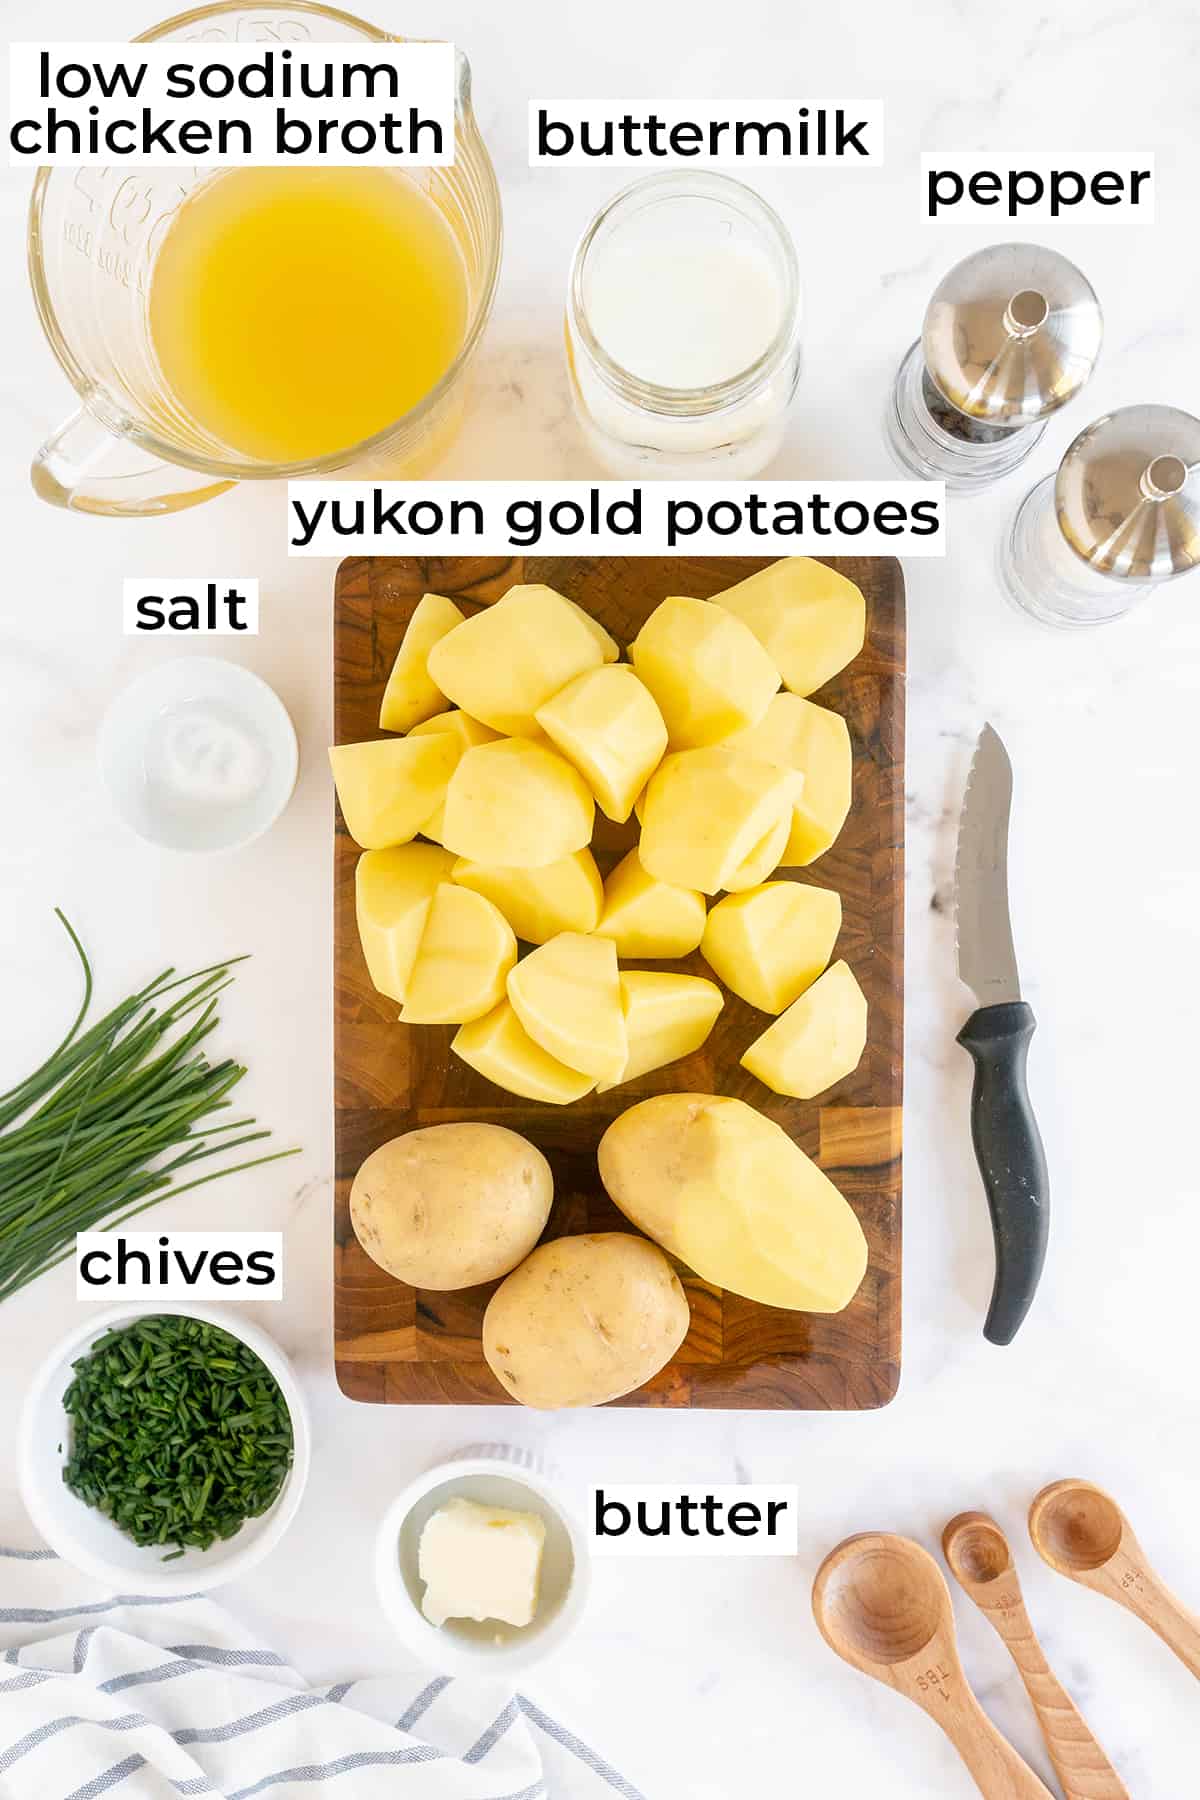 The ingredients required to make Buttermilk Mashed Potatoes